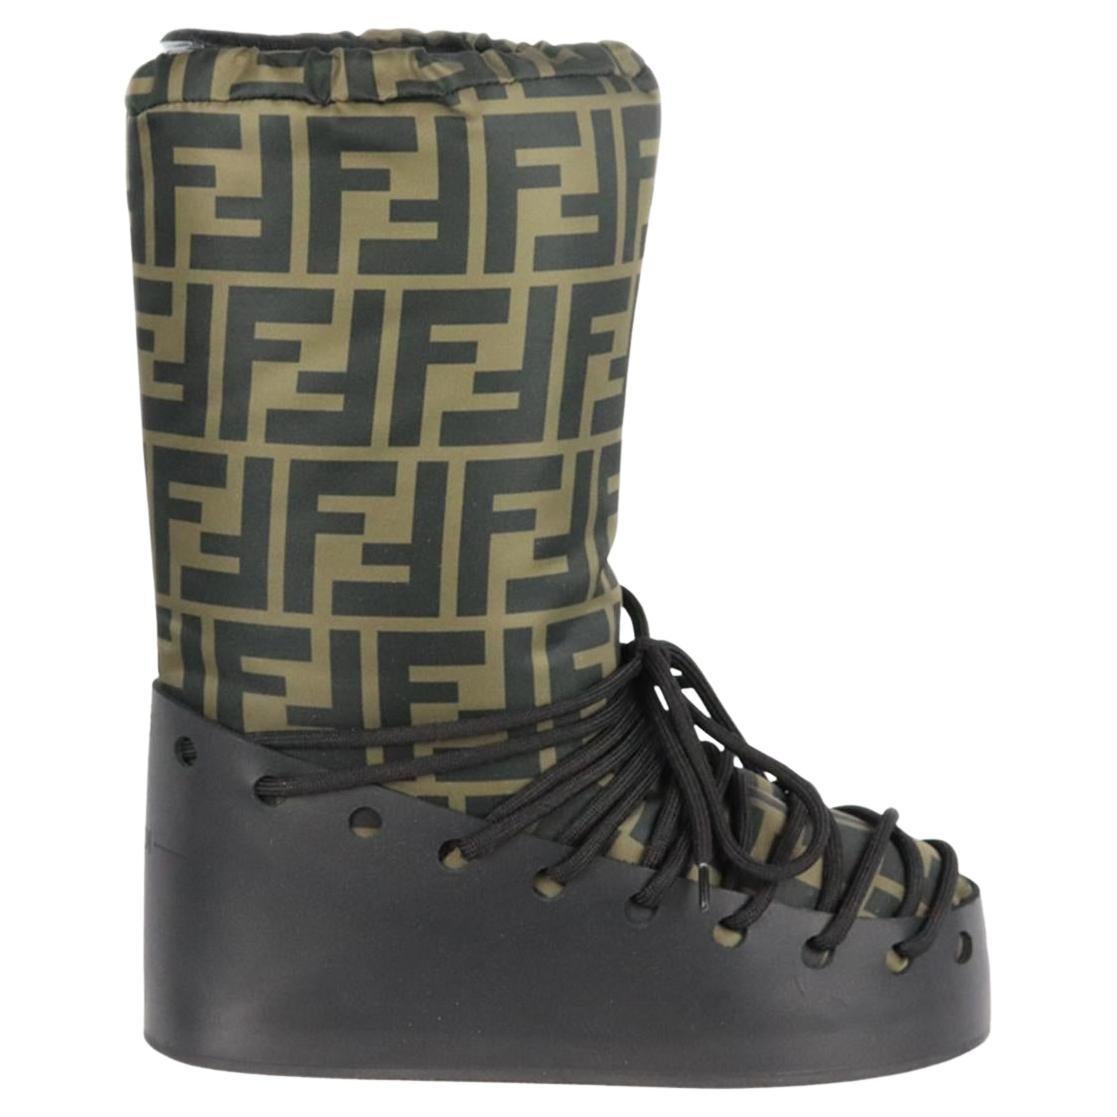 Fendi Ff Printed Shell And Leather Snow Boots Eu 38 Uk 5 Us 6